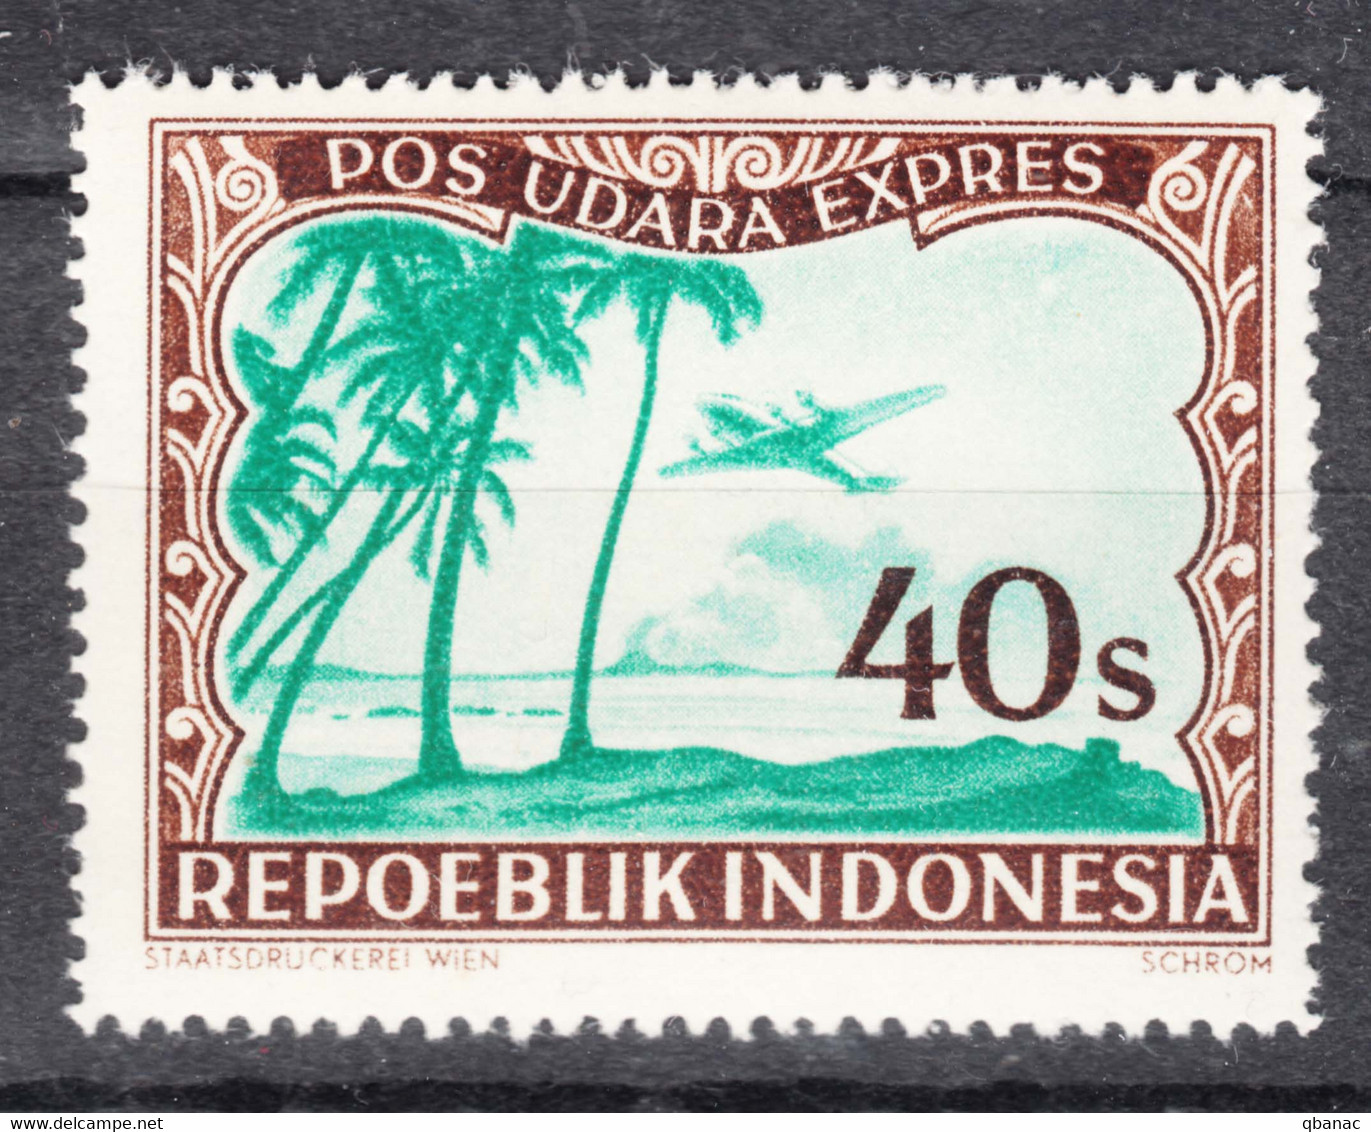 Indonesia Joint Issue 1948 Airmail Express Mi#90 Mint Never Hinged - Indonesië